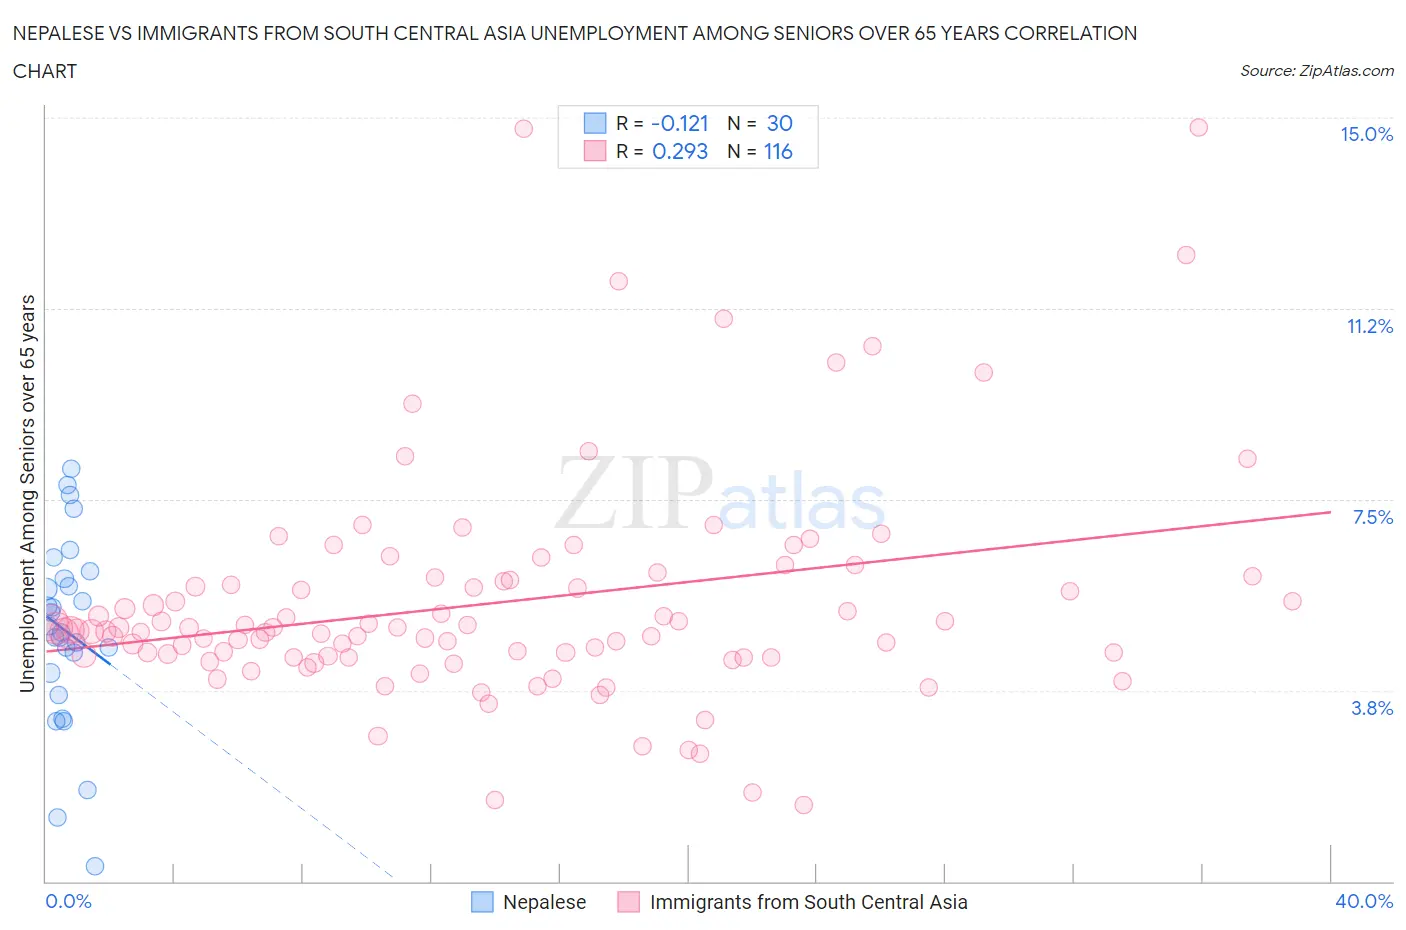 Nepalese vs Immigrants from South Central Asia Unemployment Among Seniors over 65 years